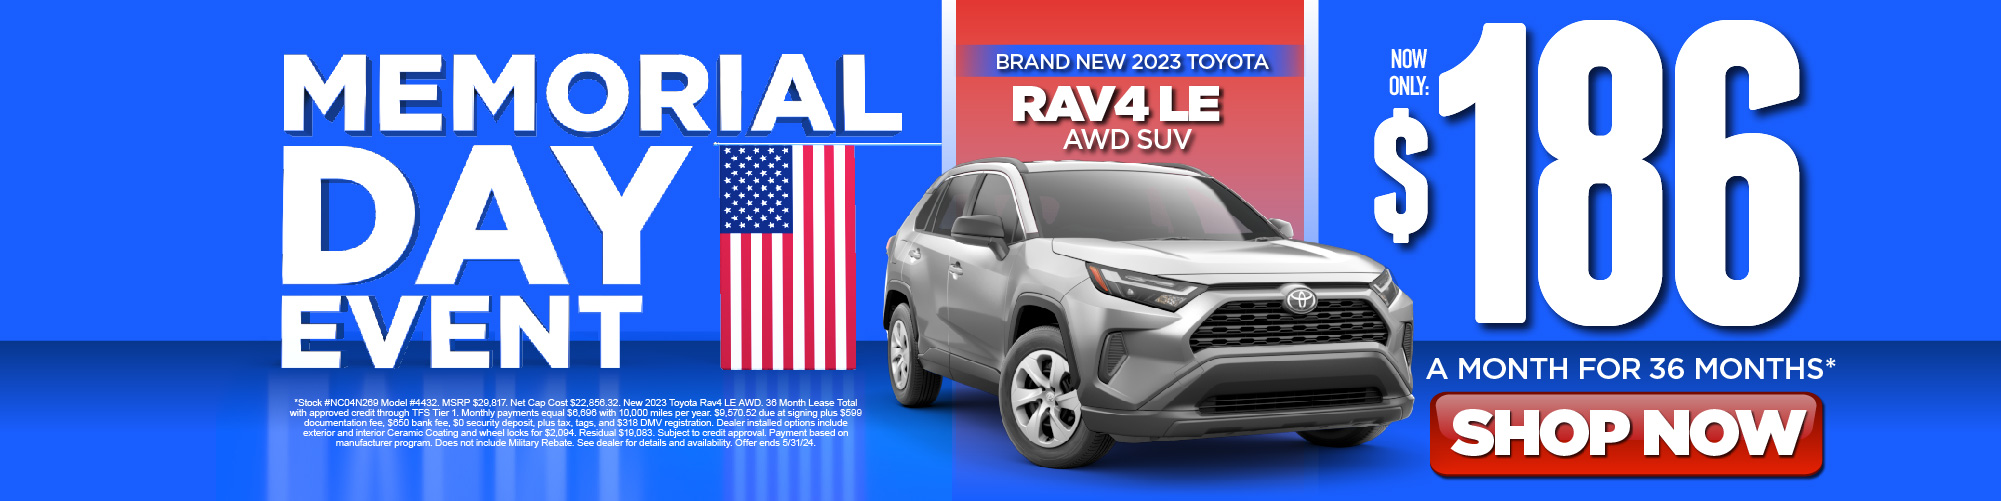 Brand New 2022 Toyota Highlander XLE AWD SUV | Now Only: $310 a month for 36 Months* Act Now.